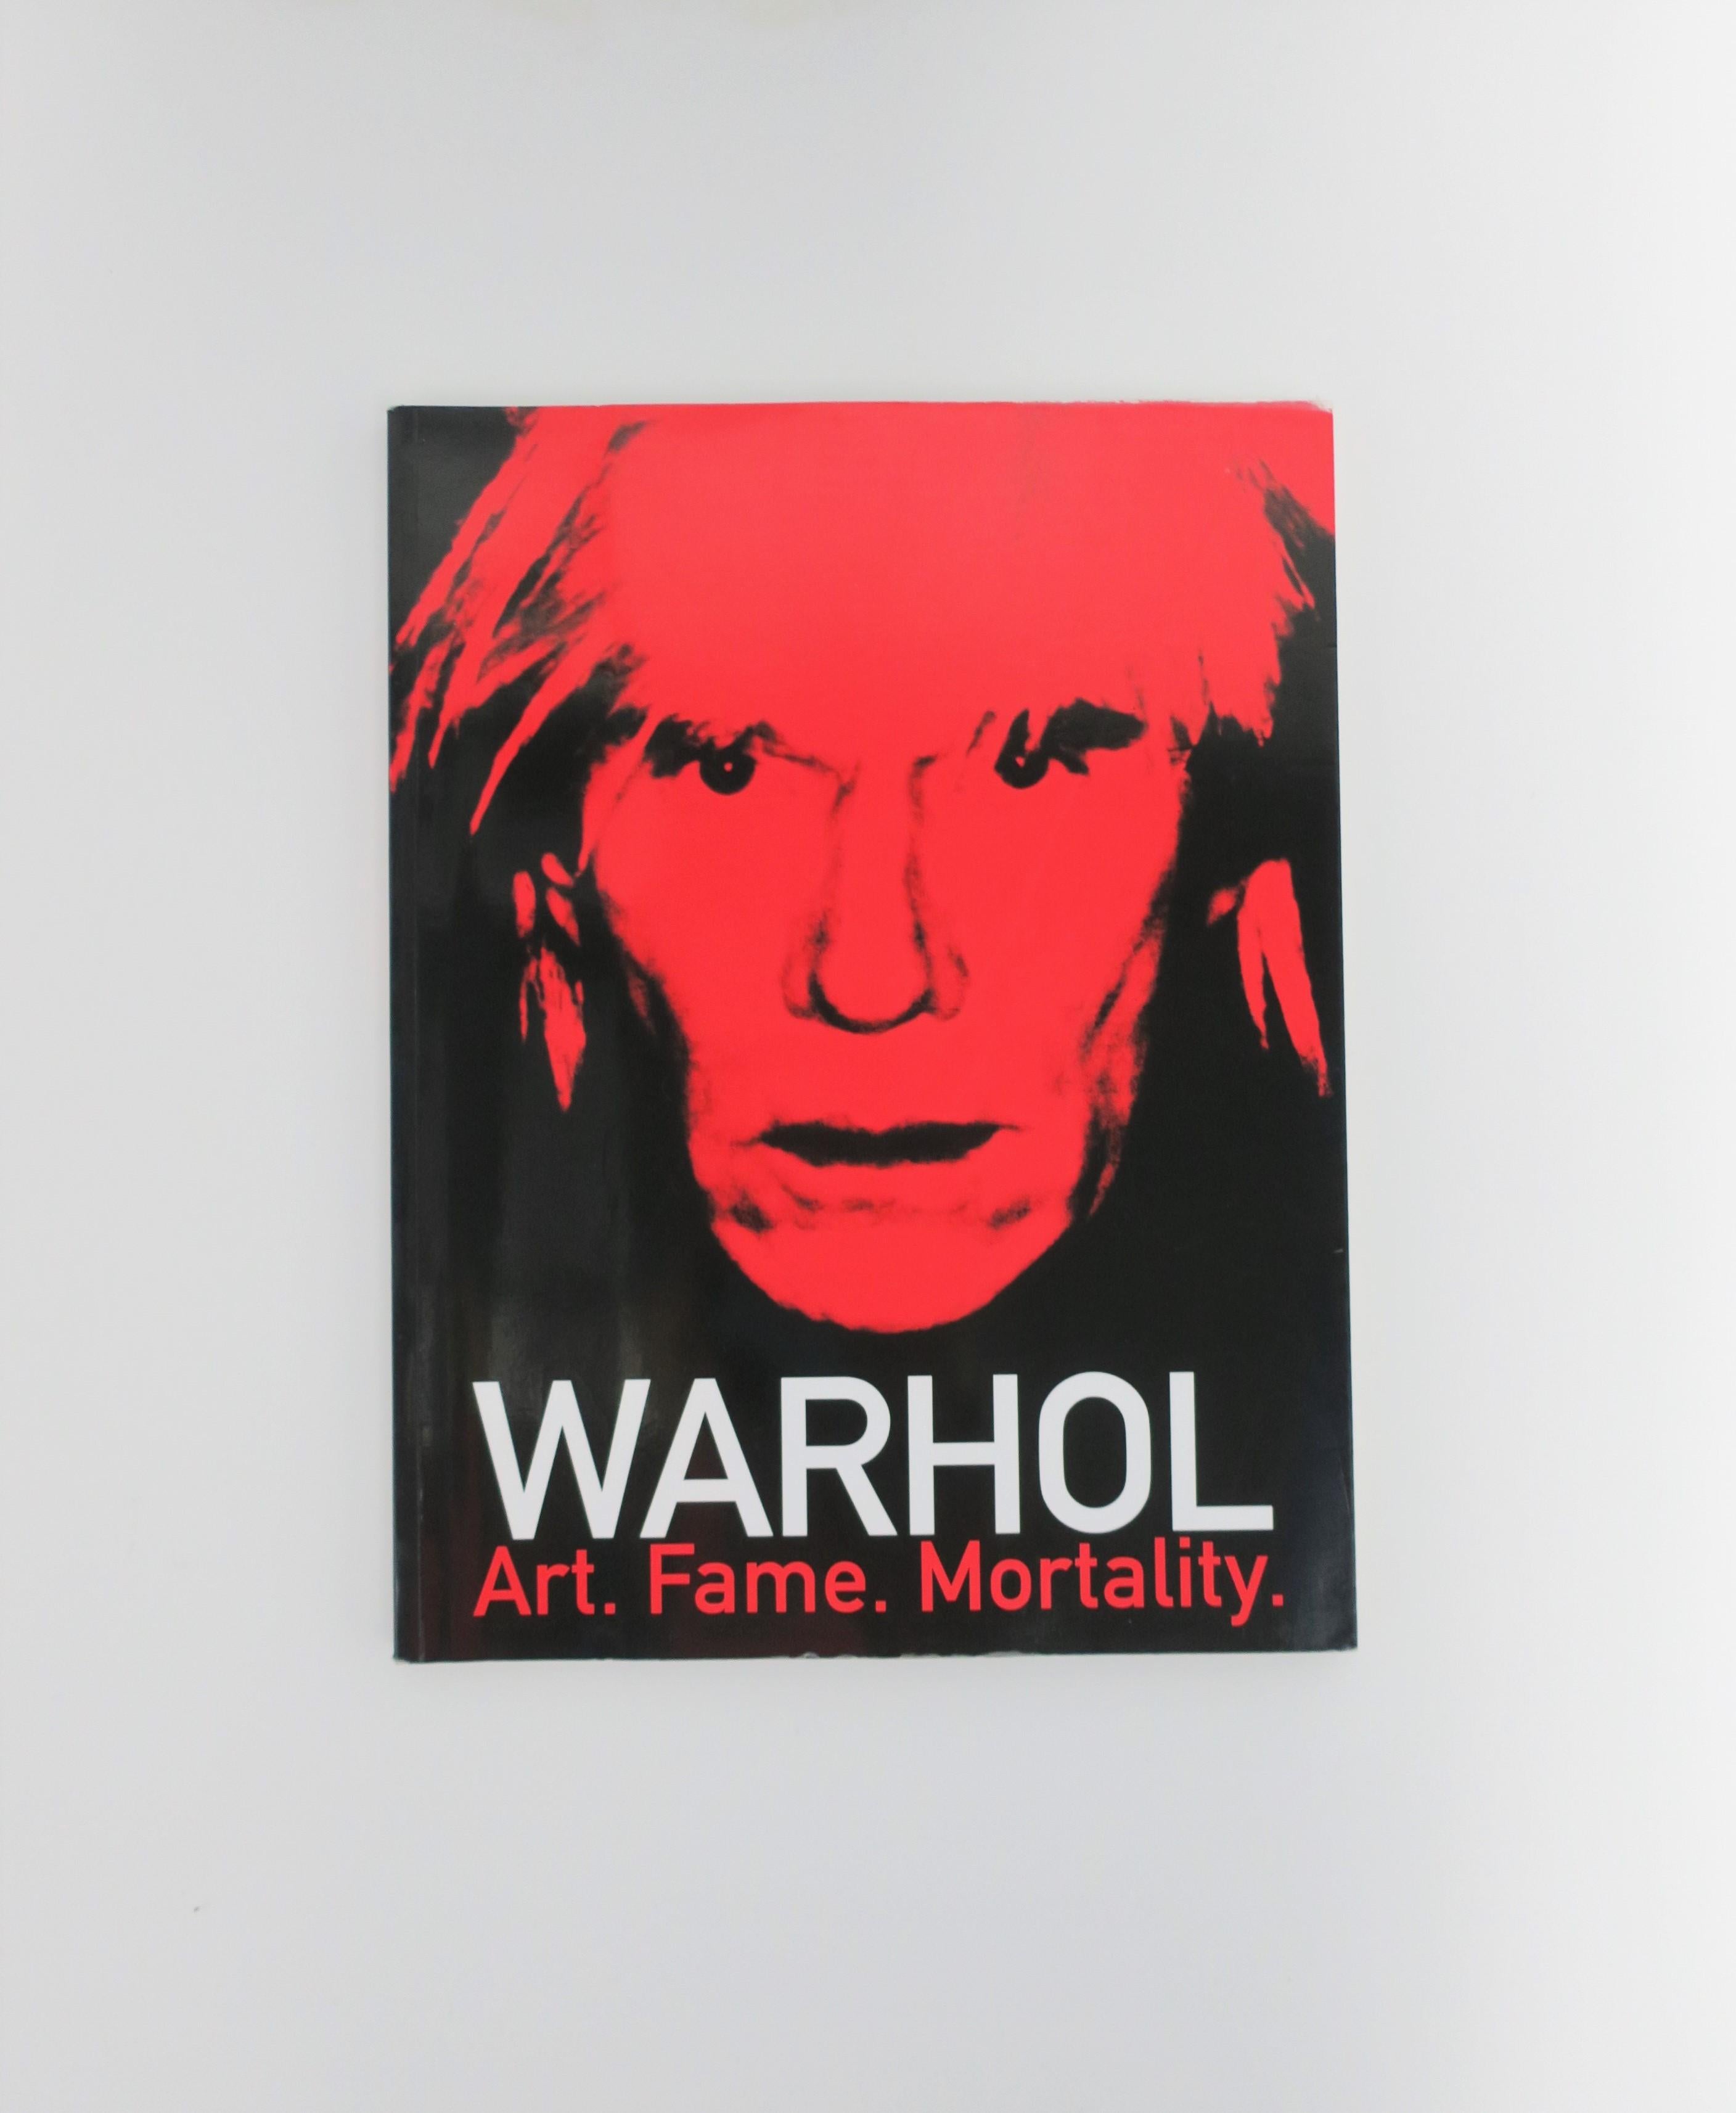 An early 21st century 'Warhol: Art. Fame. Mortality.' exhibition book by The Dali Museum, St. Petersburg, FL, 2014. This book was published on the occasion of the exhibition 'Warhol: Art. Fame. Mortality.', The Dali Museum, January 18, 2014 - April